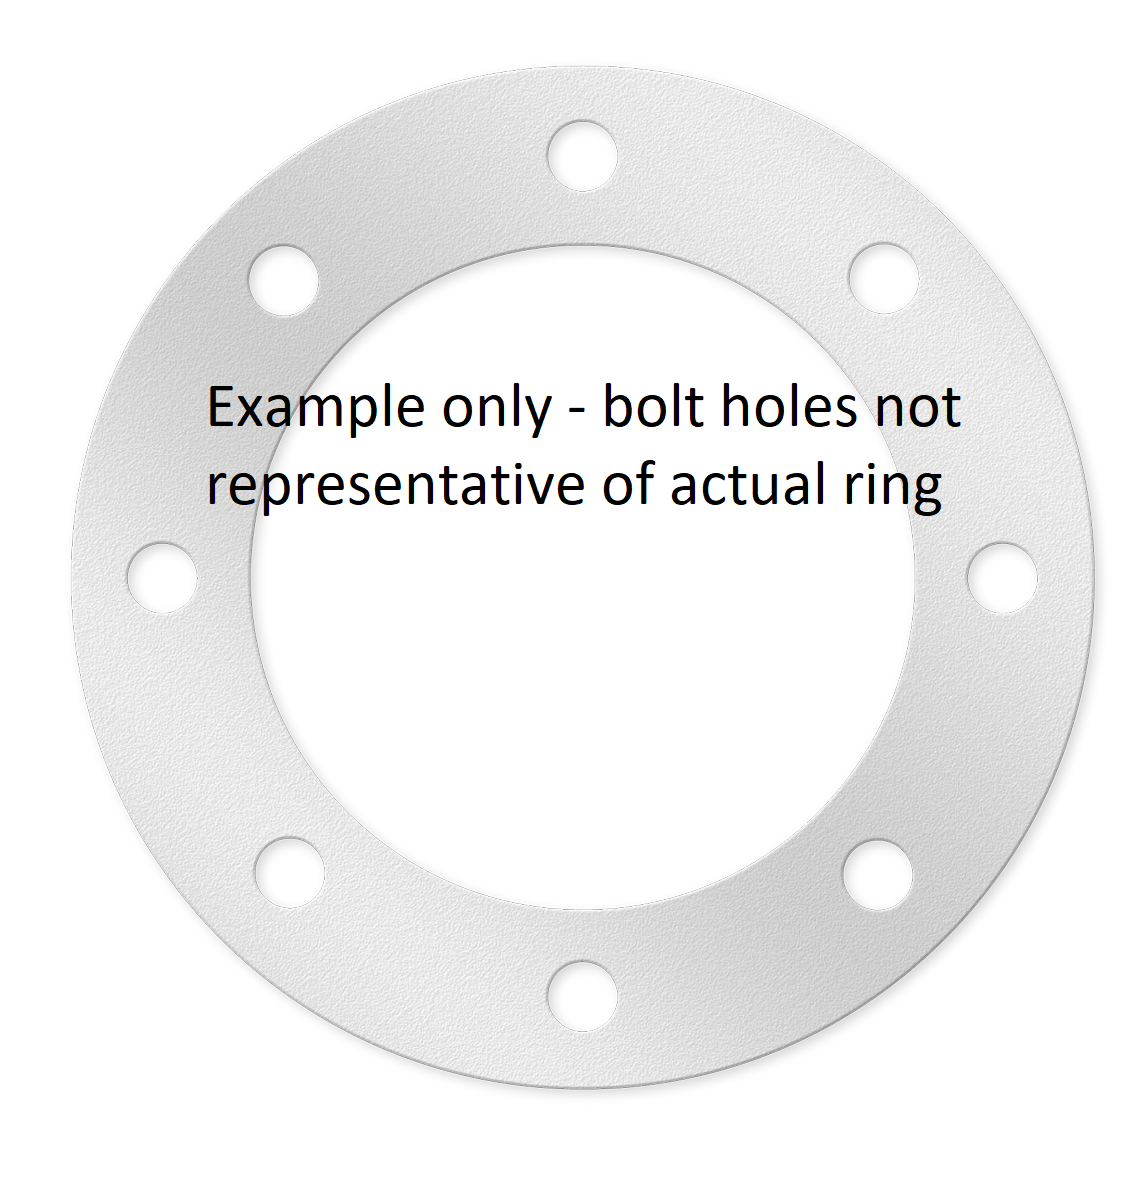 32 AS4087 B7 BACKING RING STAINLESS STEEL TO SUIT PE